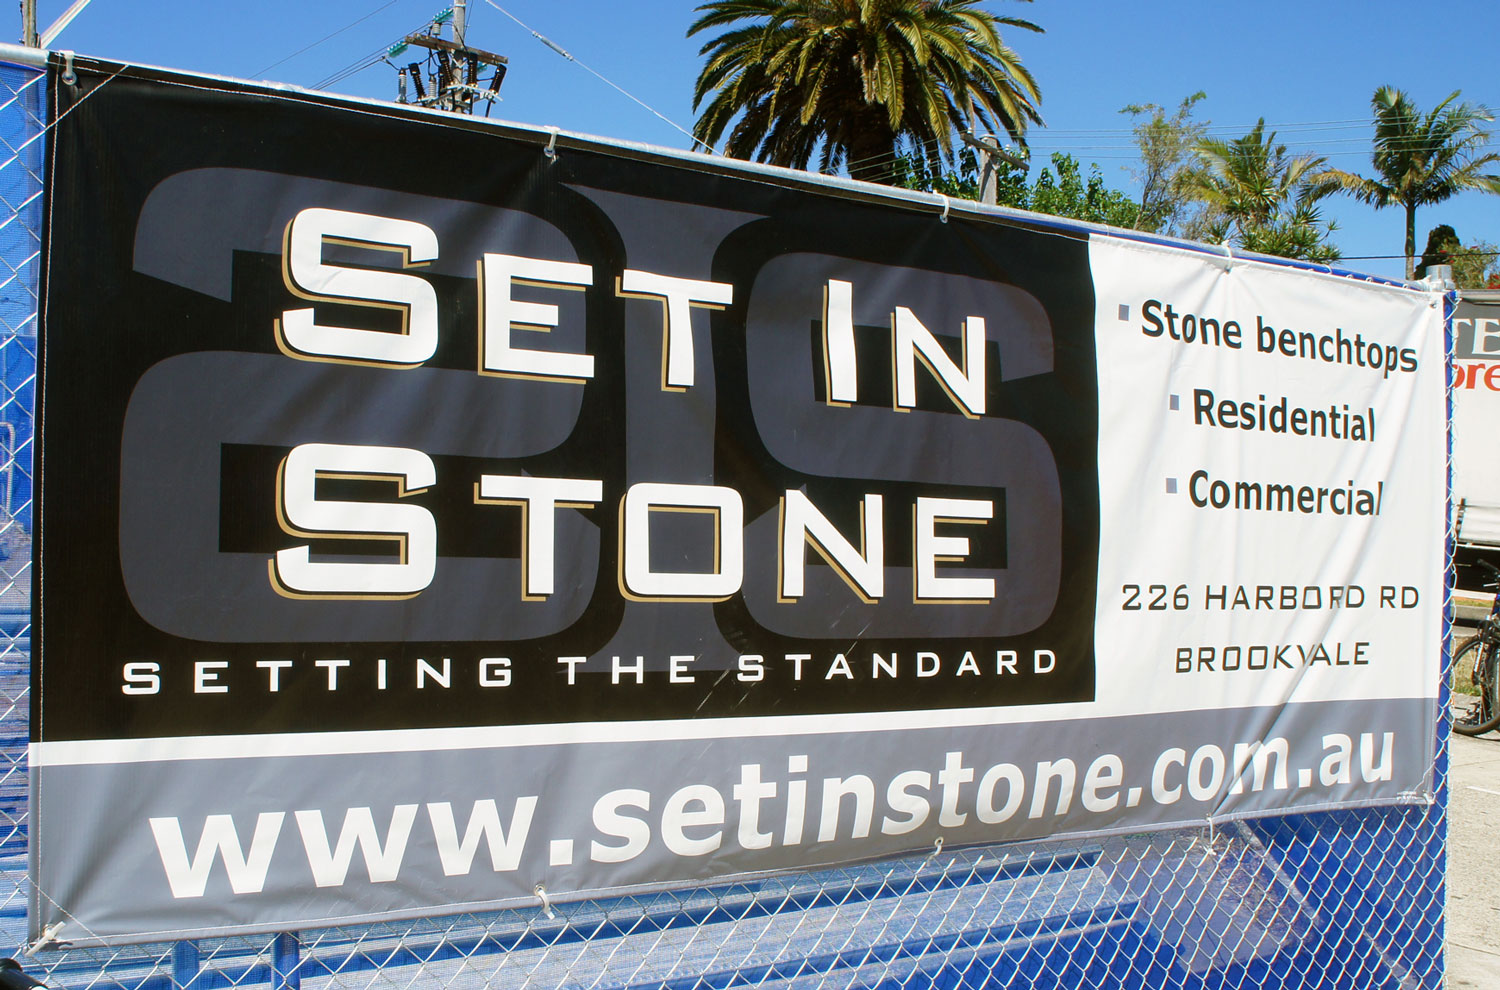 banners vinyl rectangular shape with rope and eyelets, from northern beaches Sydney by Hybrid Signs